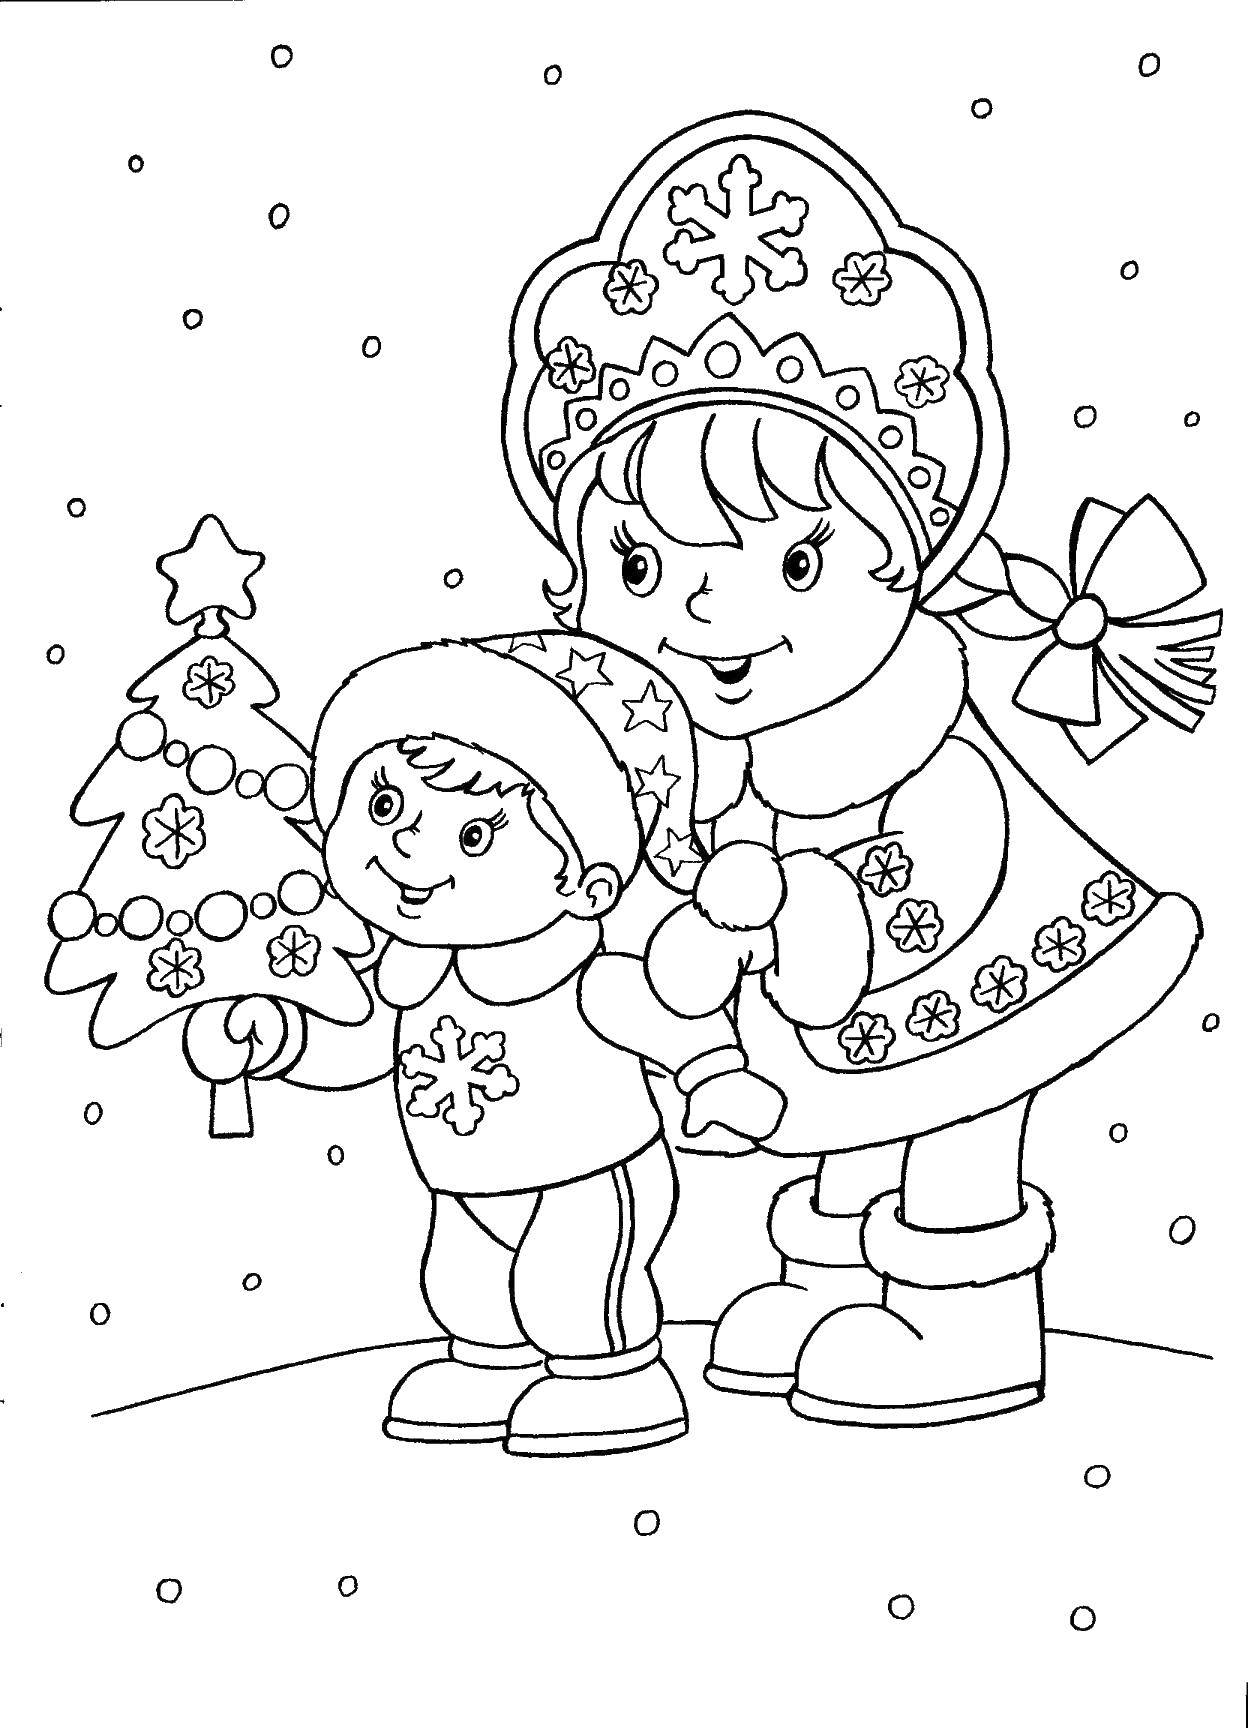 Coloring Snegurochka gave the boy a tree. Category maiden. Tags:  snow, children.